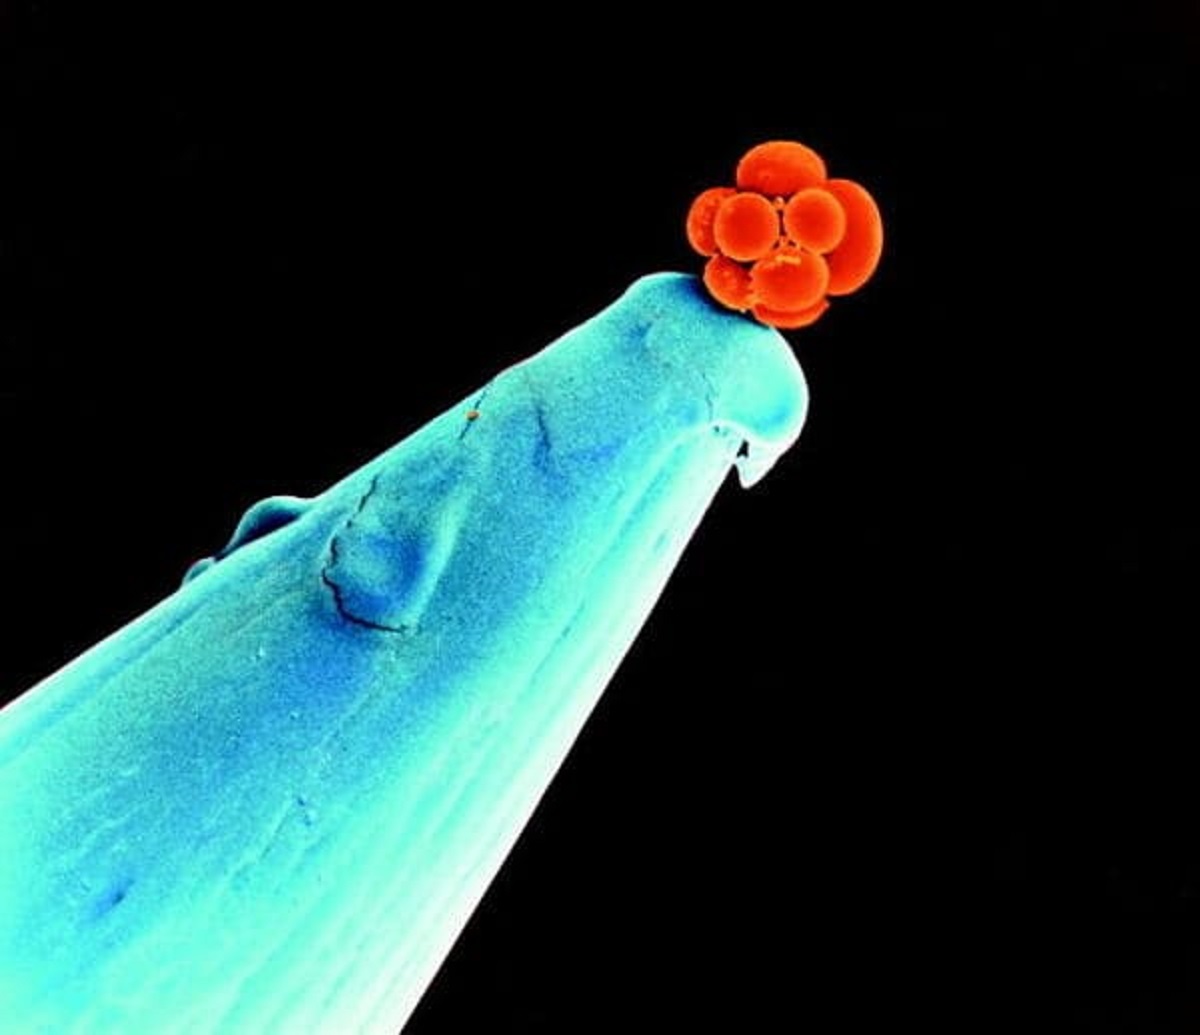 “An Early Human Embryo On The Tip Of A Needle”